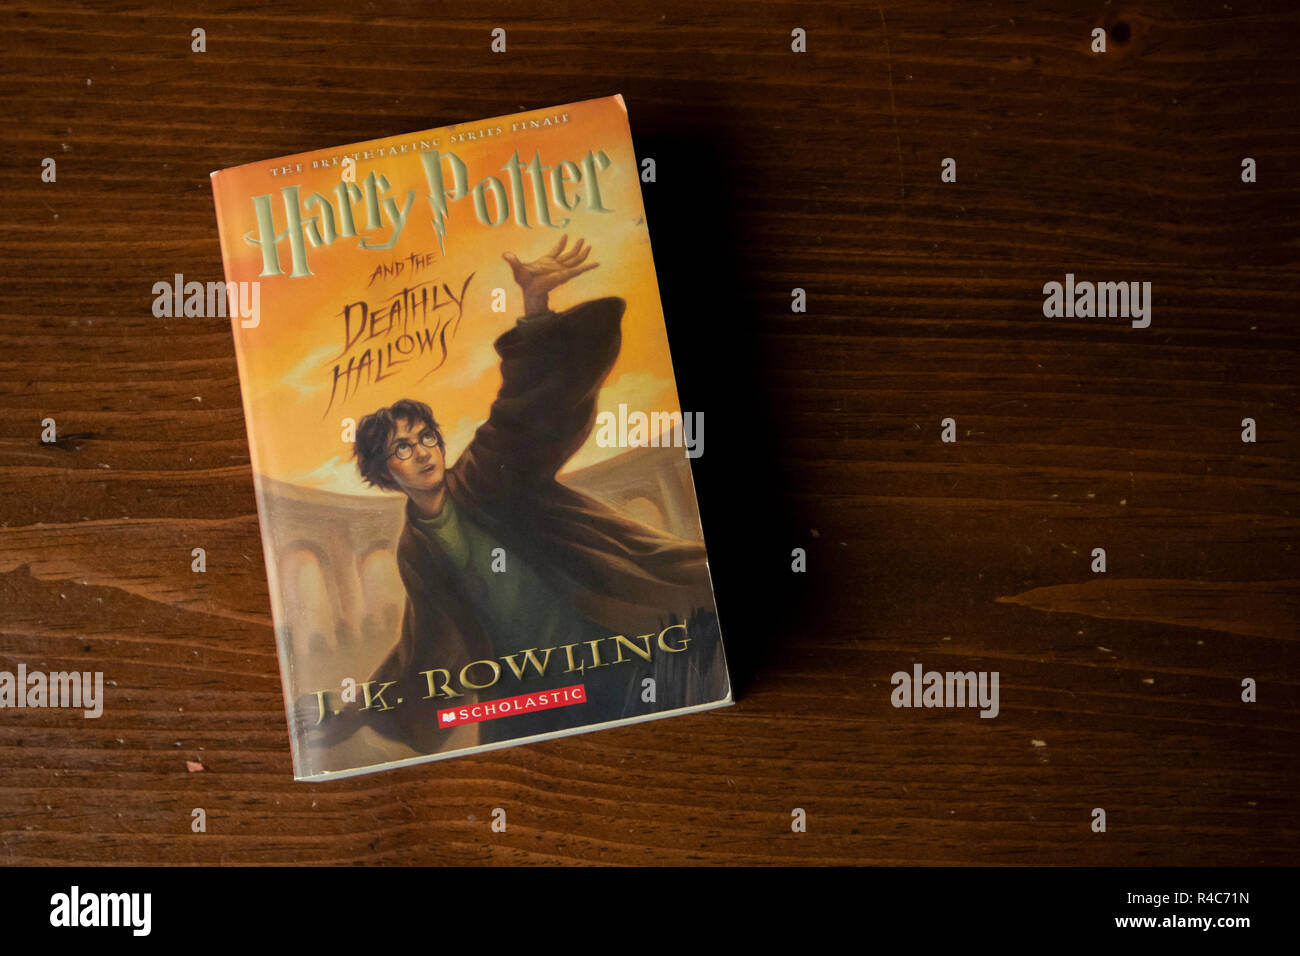 Harry Potter and the Deathly Hallows book on wood table Stock Photo